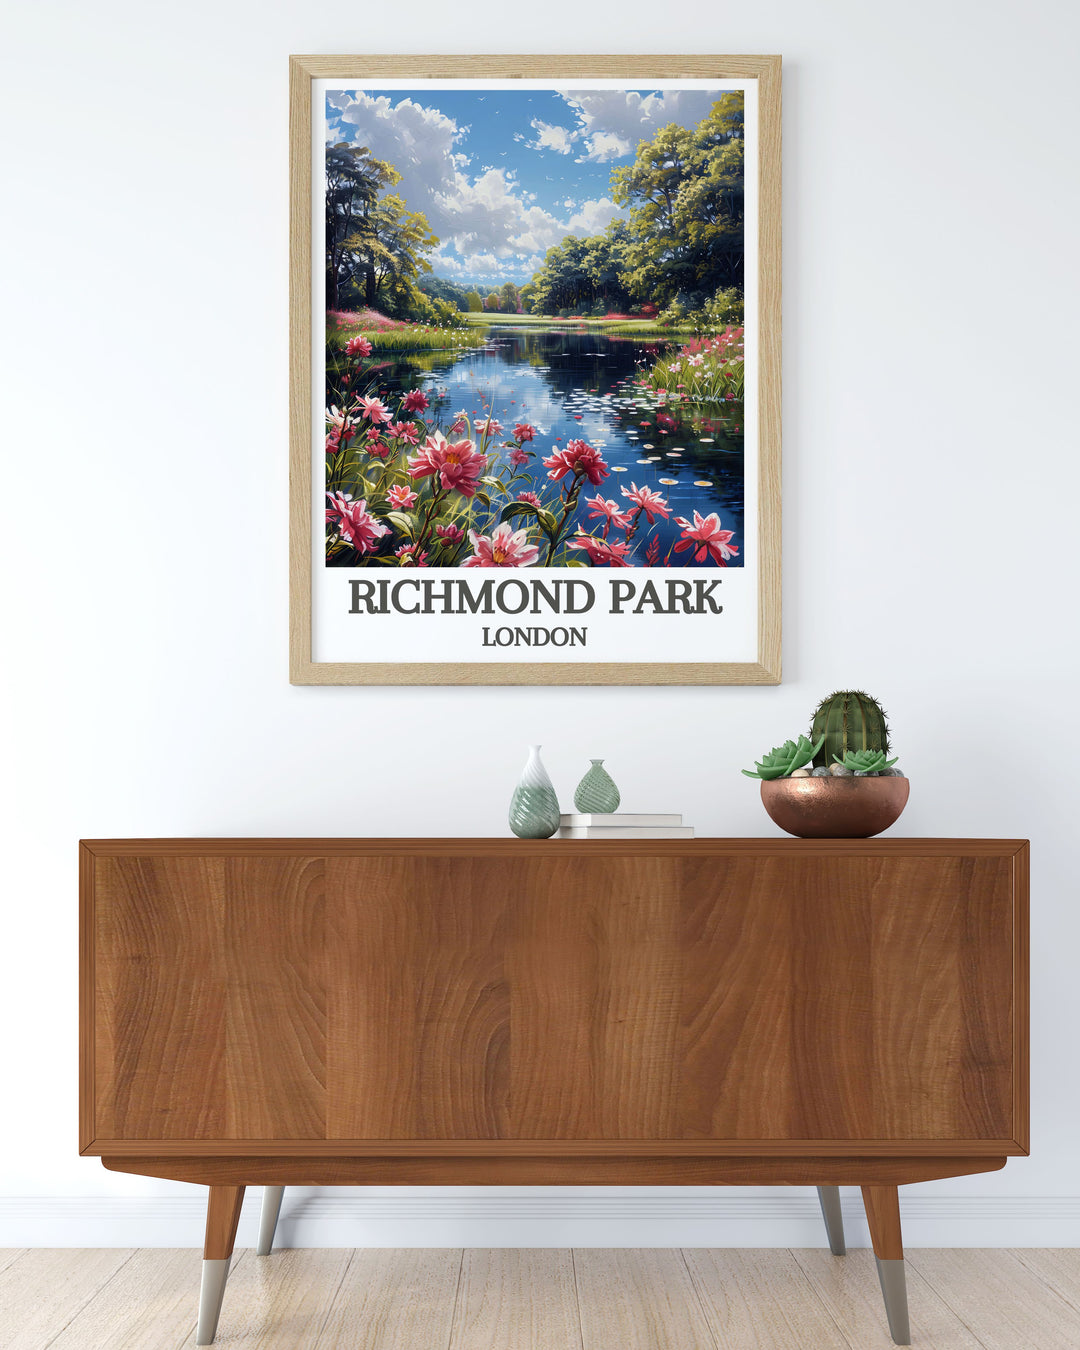 Stunning Richmond Park Poster capturing the natural beauty and historical significance of this beloved London park, ideal for home decor.